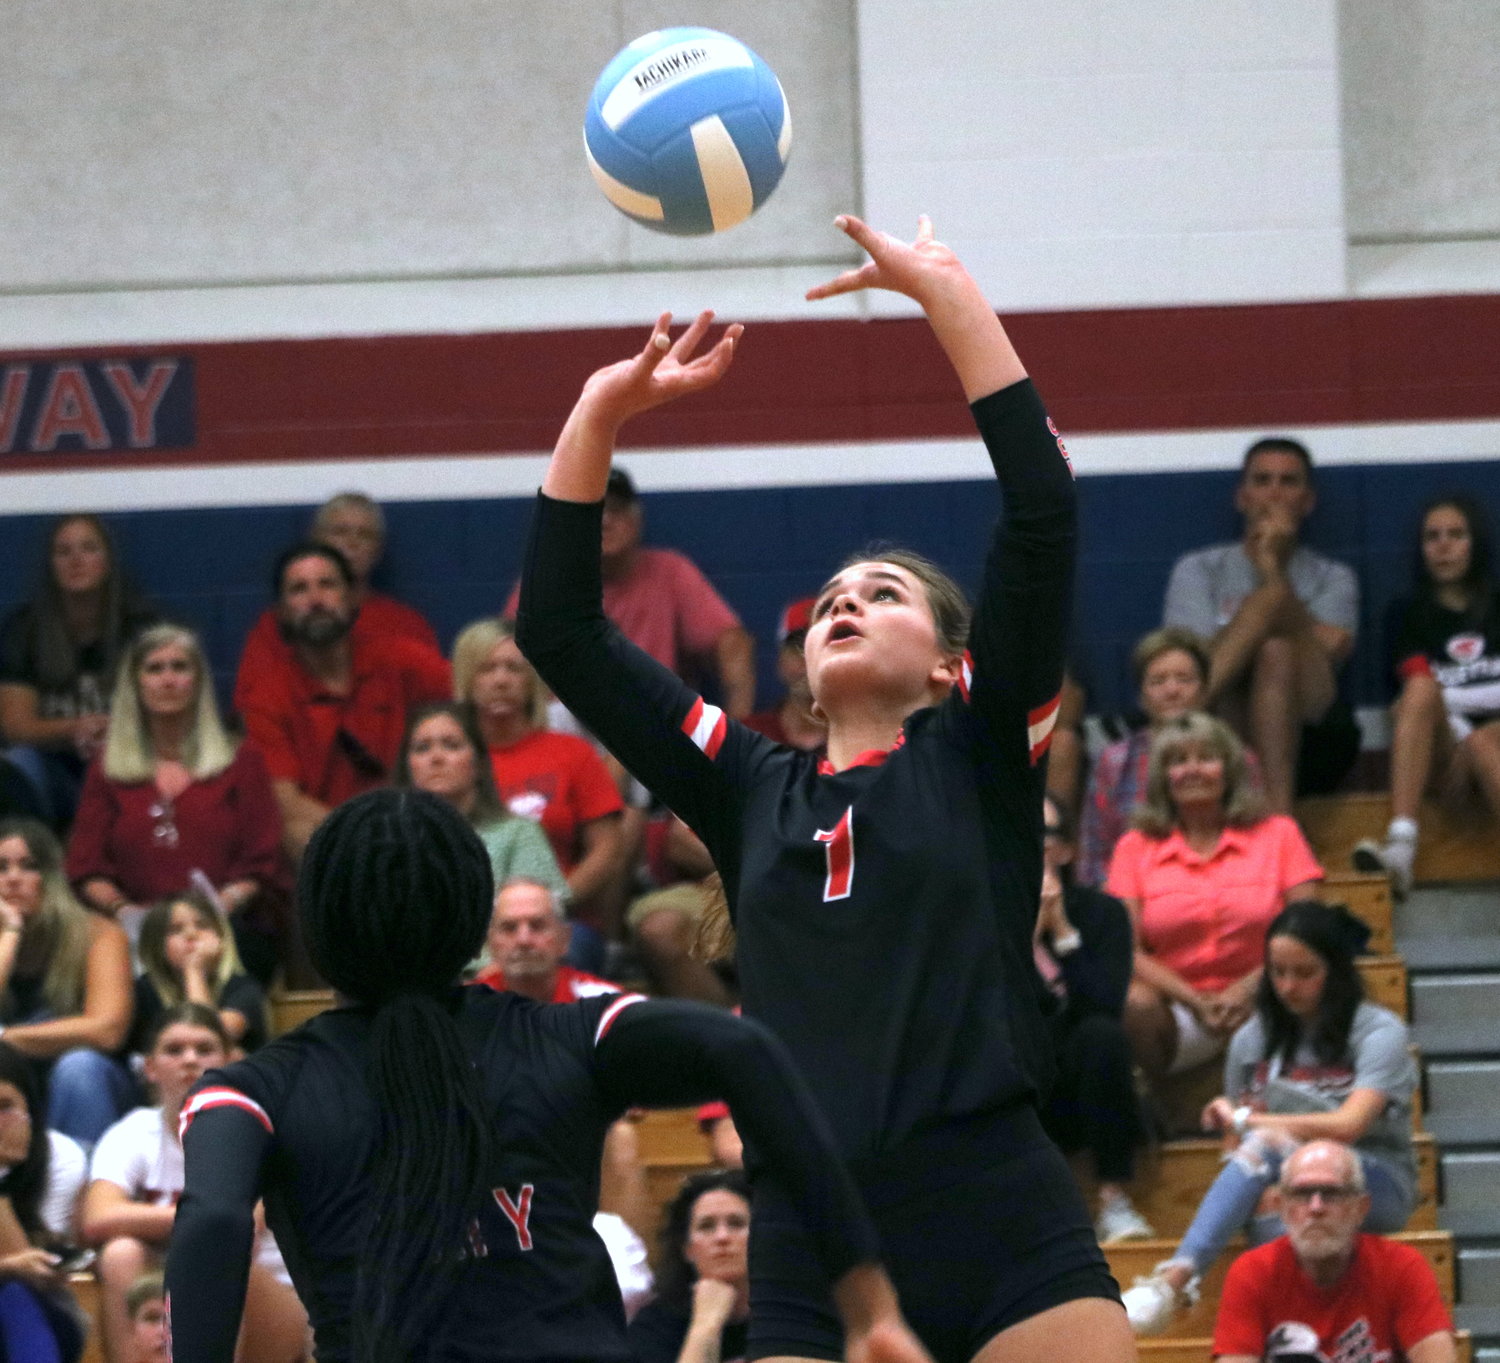 Katy’s Gabi Young sets a ball during Tuesday’s match between Tompkins and Katy at the Tompkins gym.